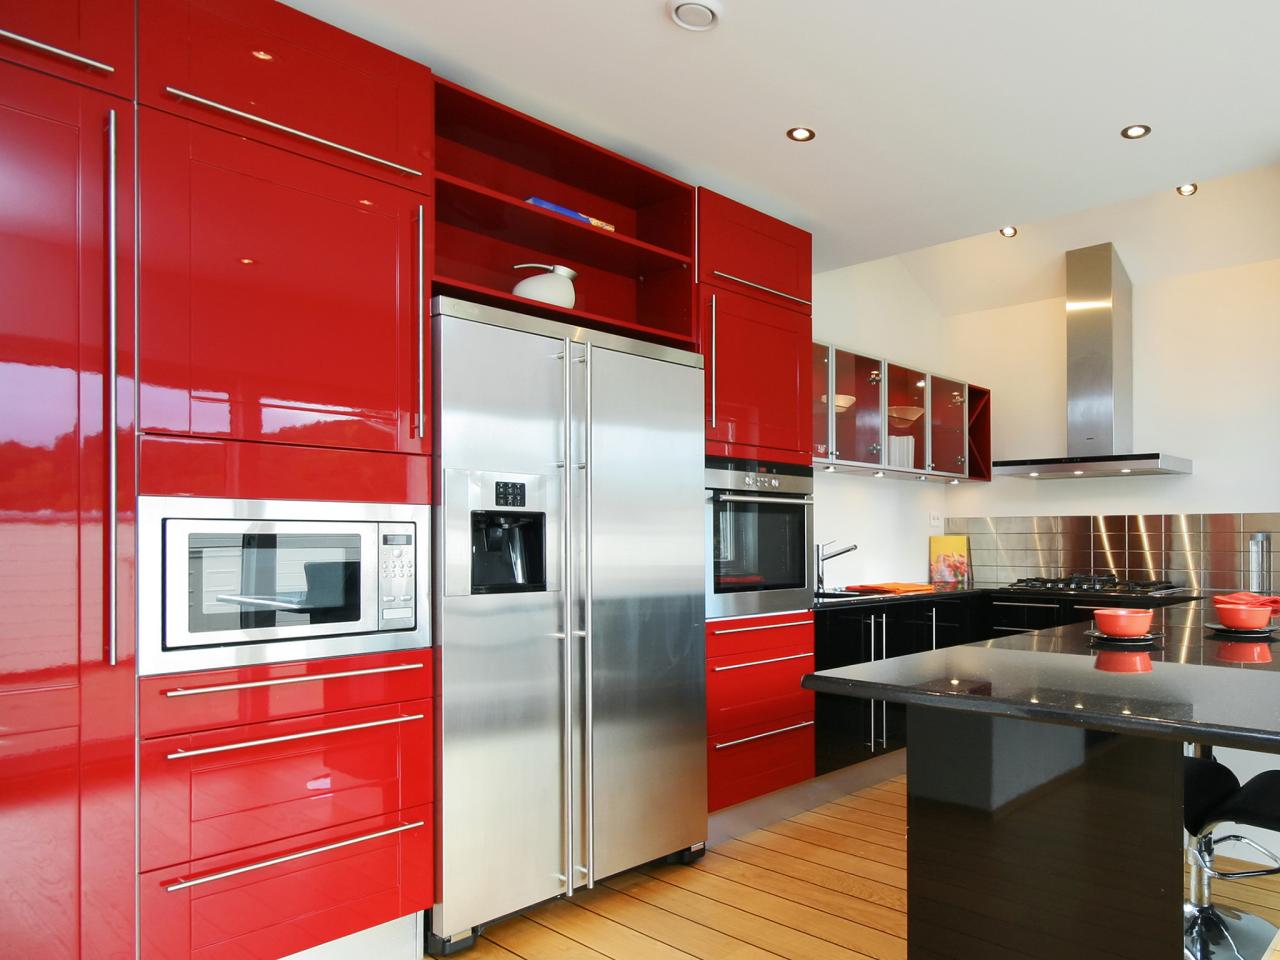 Kitchen Cabinet Colors And Finishes, How To Choose Colours For Kitchen Cabinets